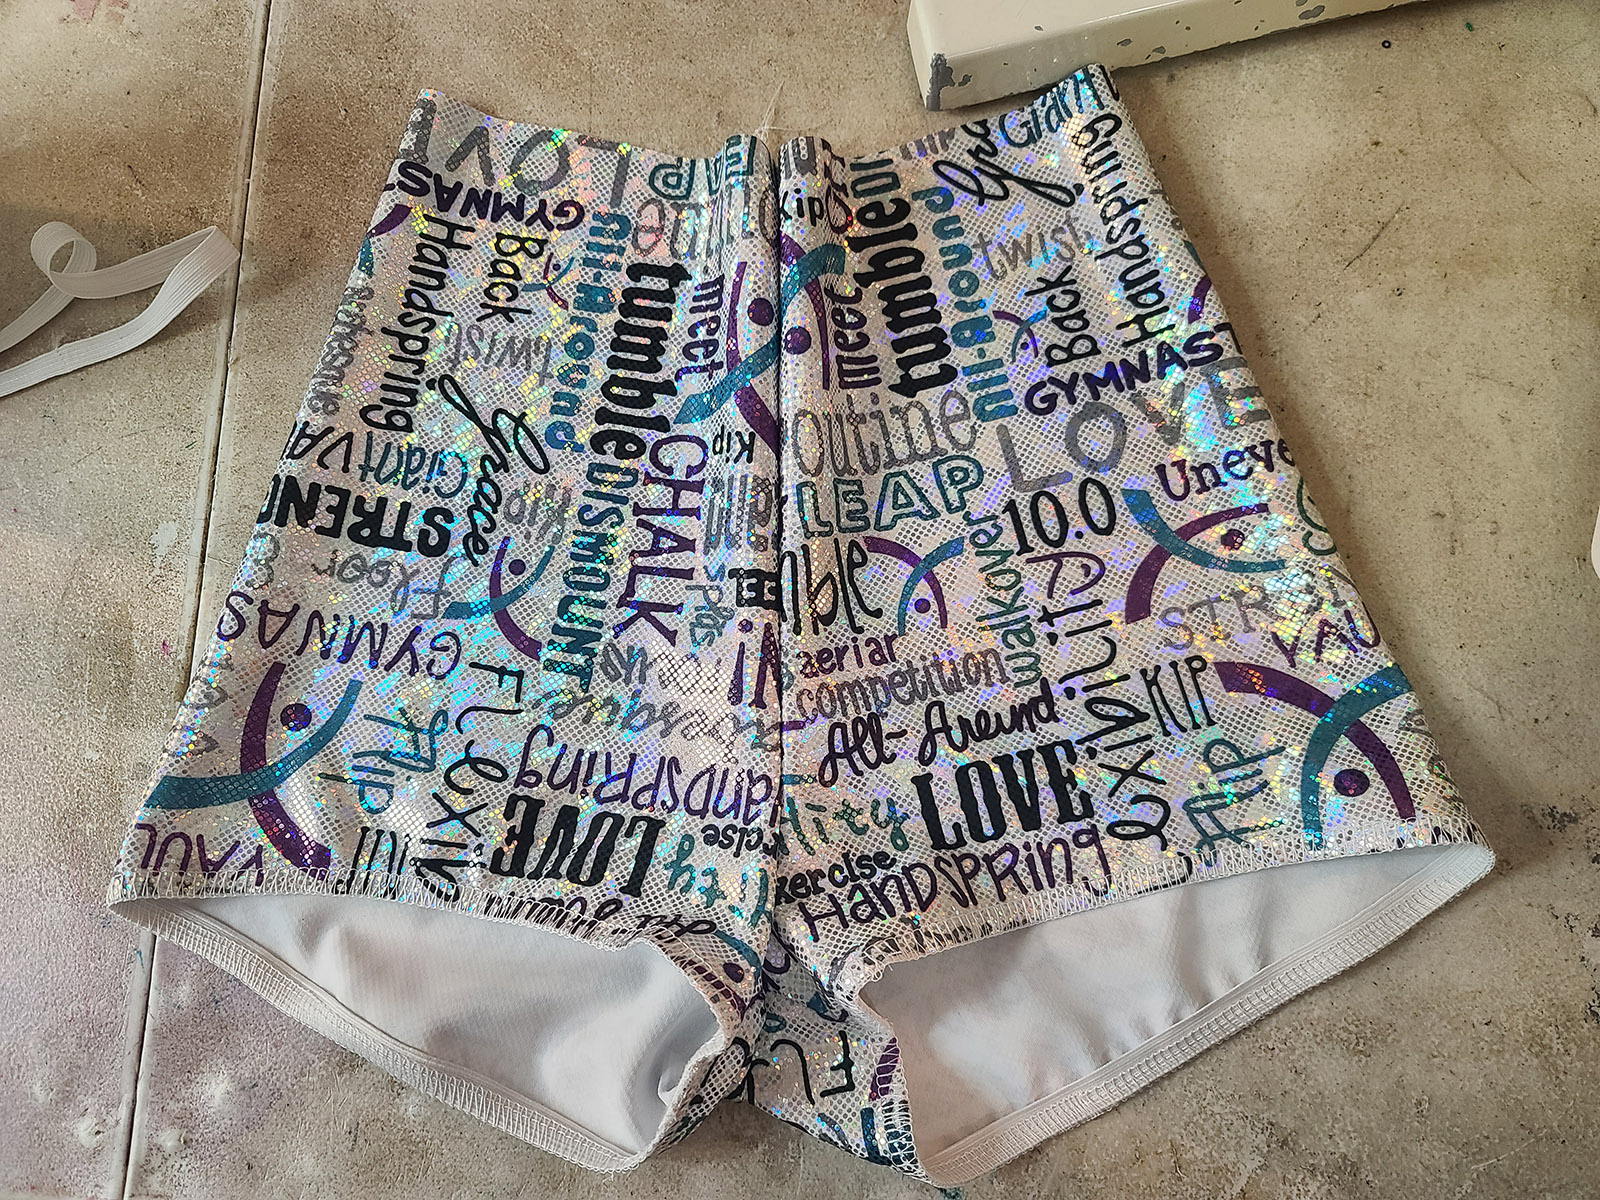 White, purple, and black holo print booty shorts with elastic sewn into the leg openings.